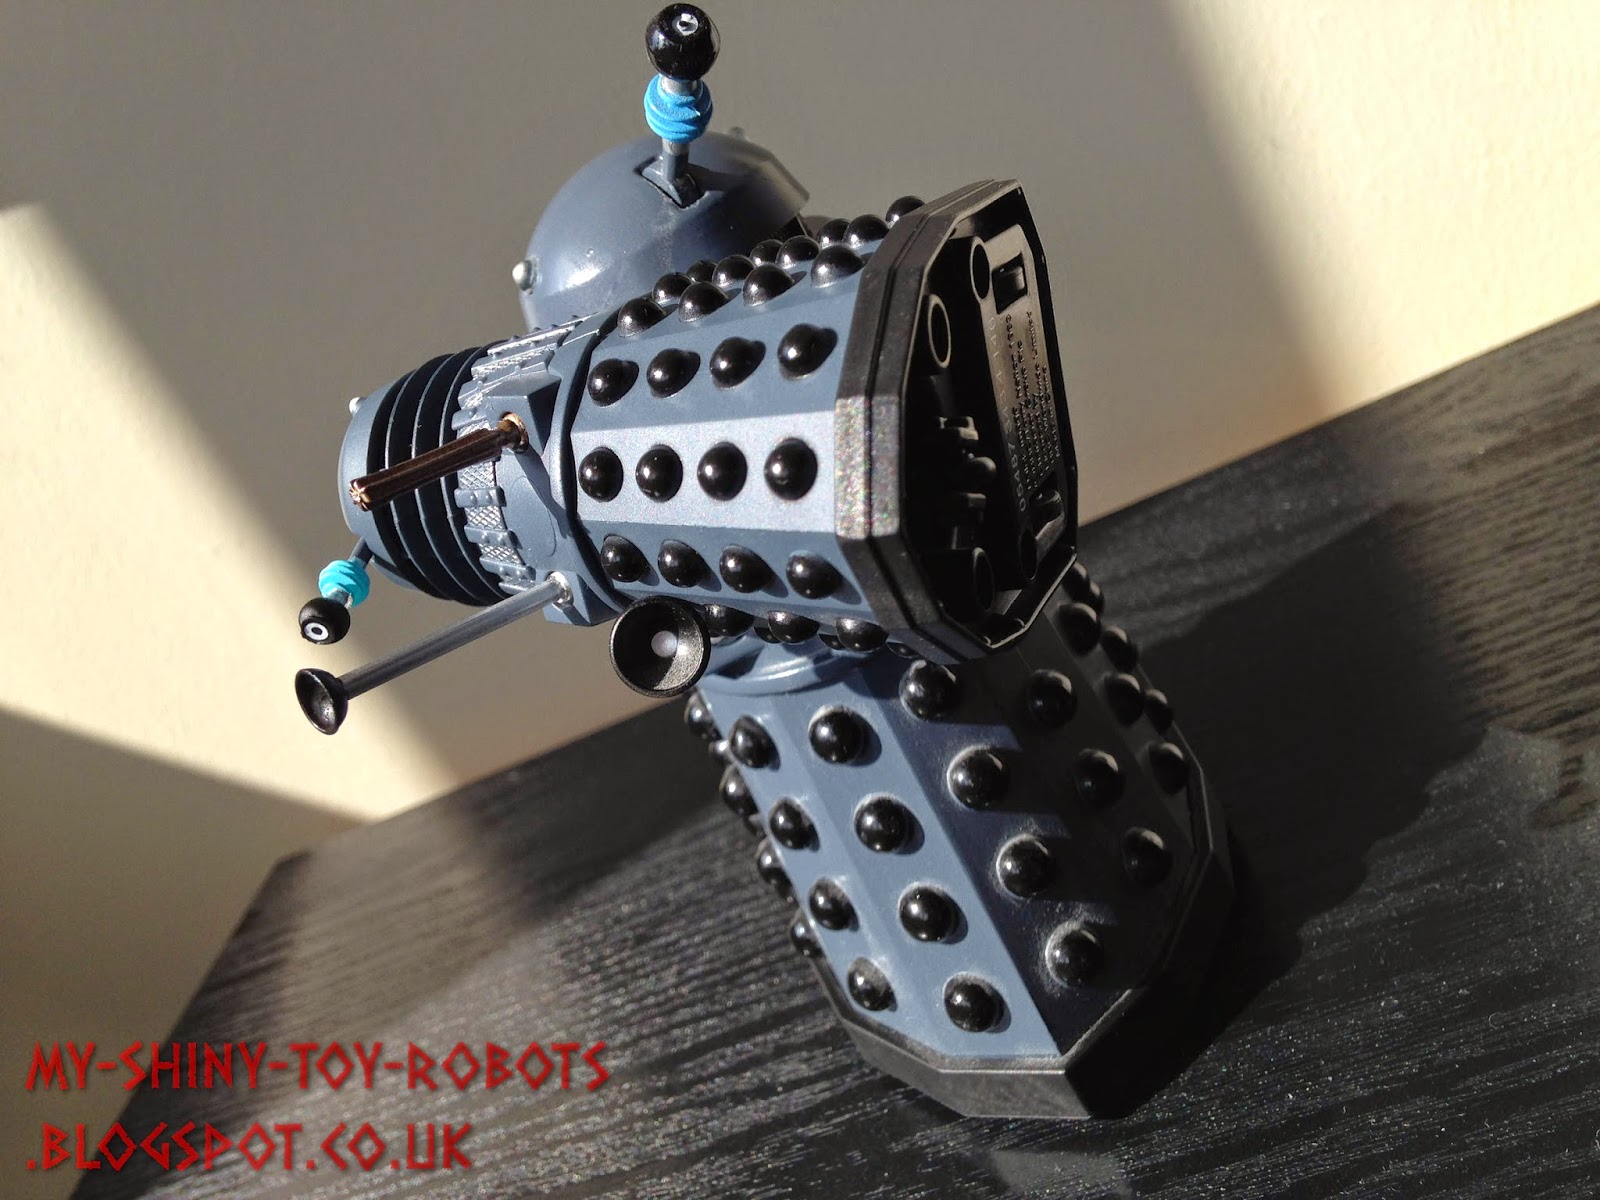 Who said Daleks couldn't be cute?